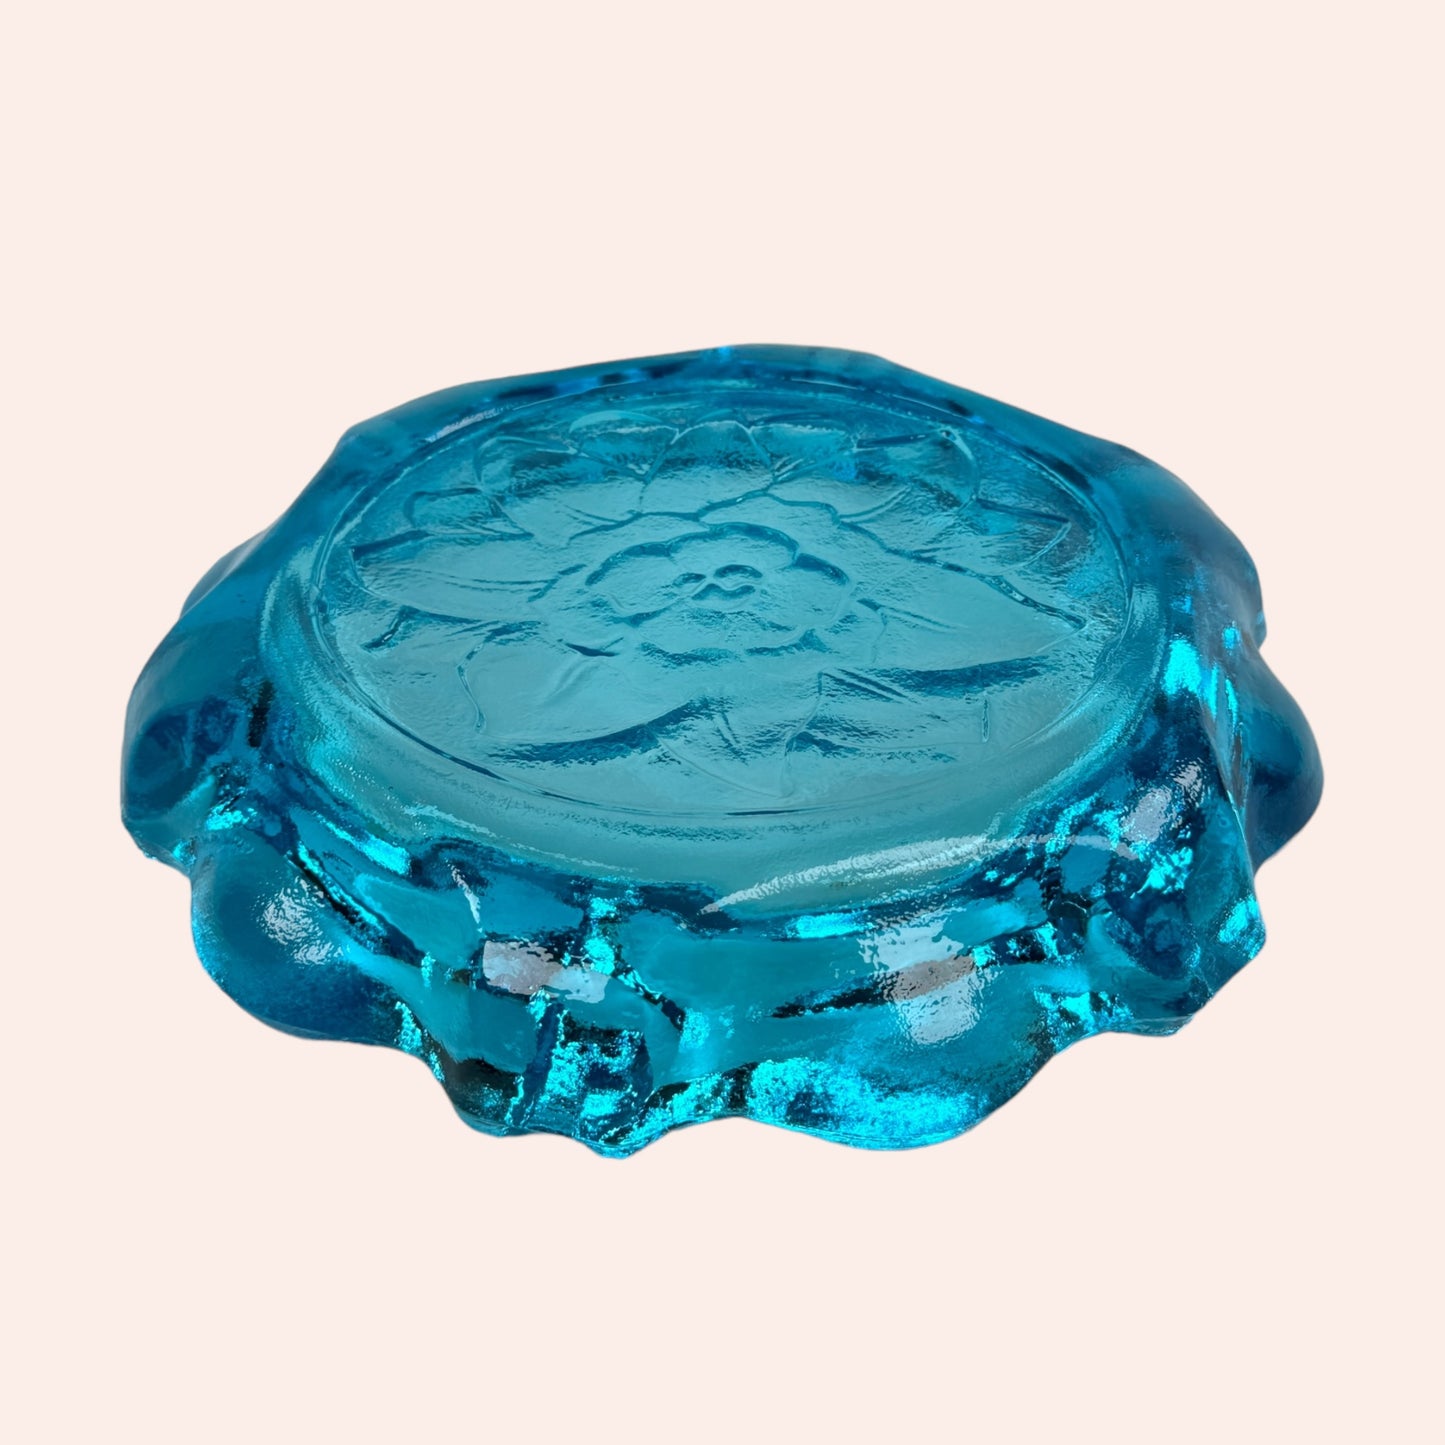 Indiana glass floral ashtray